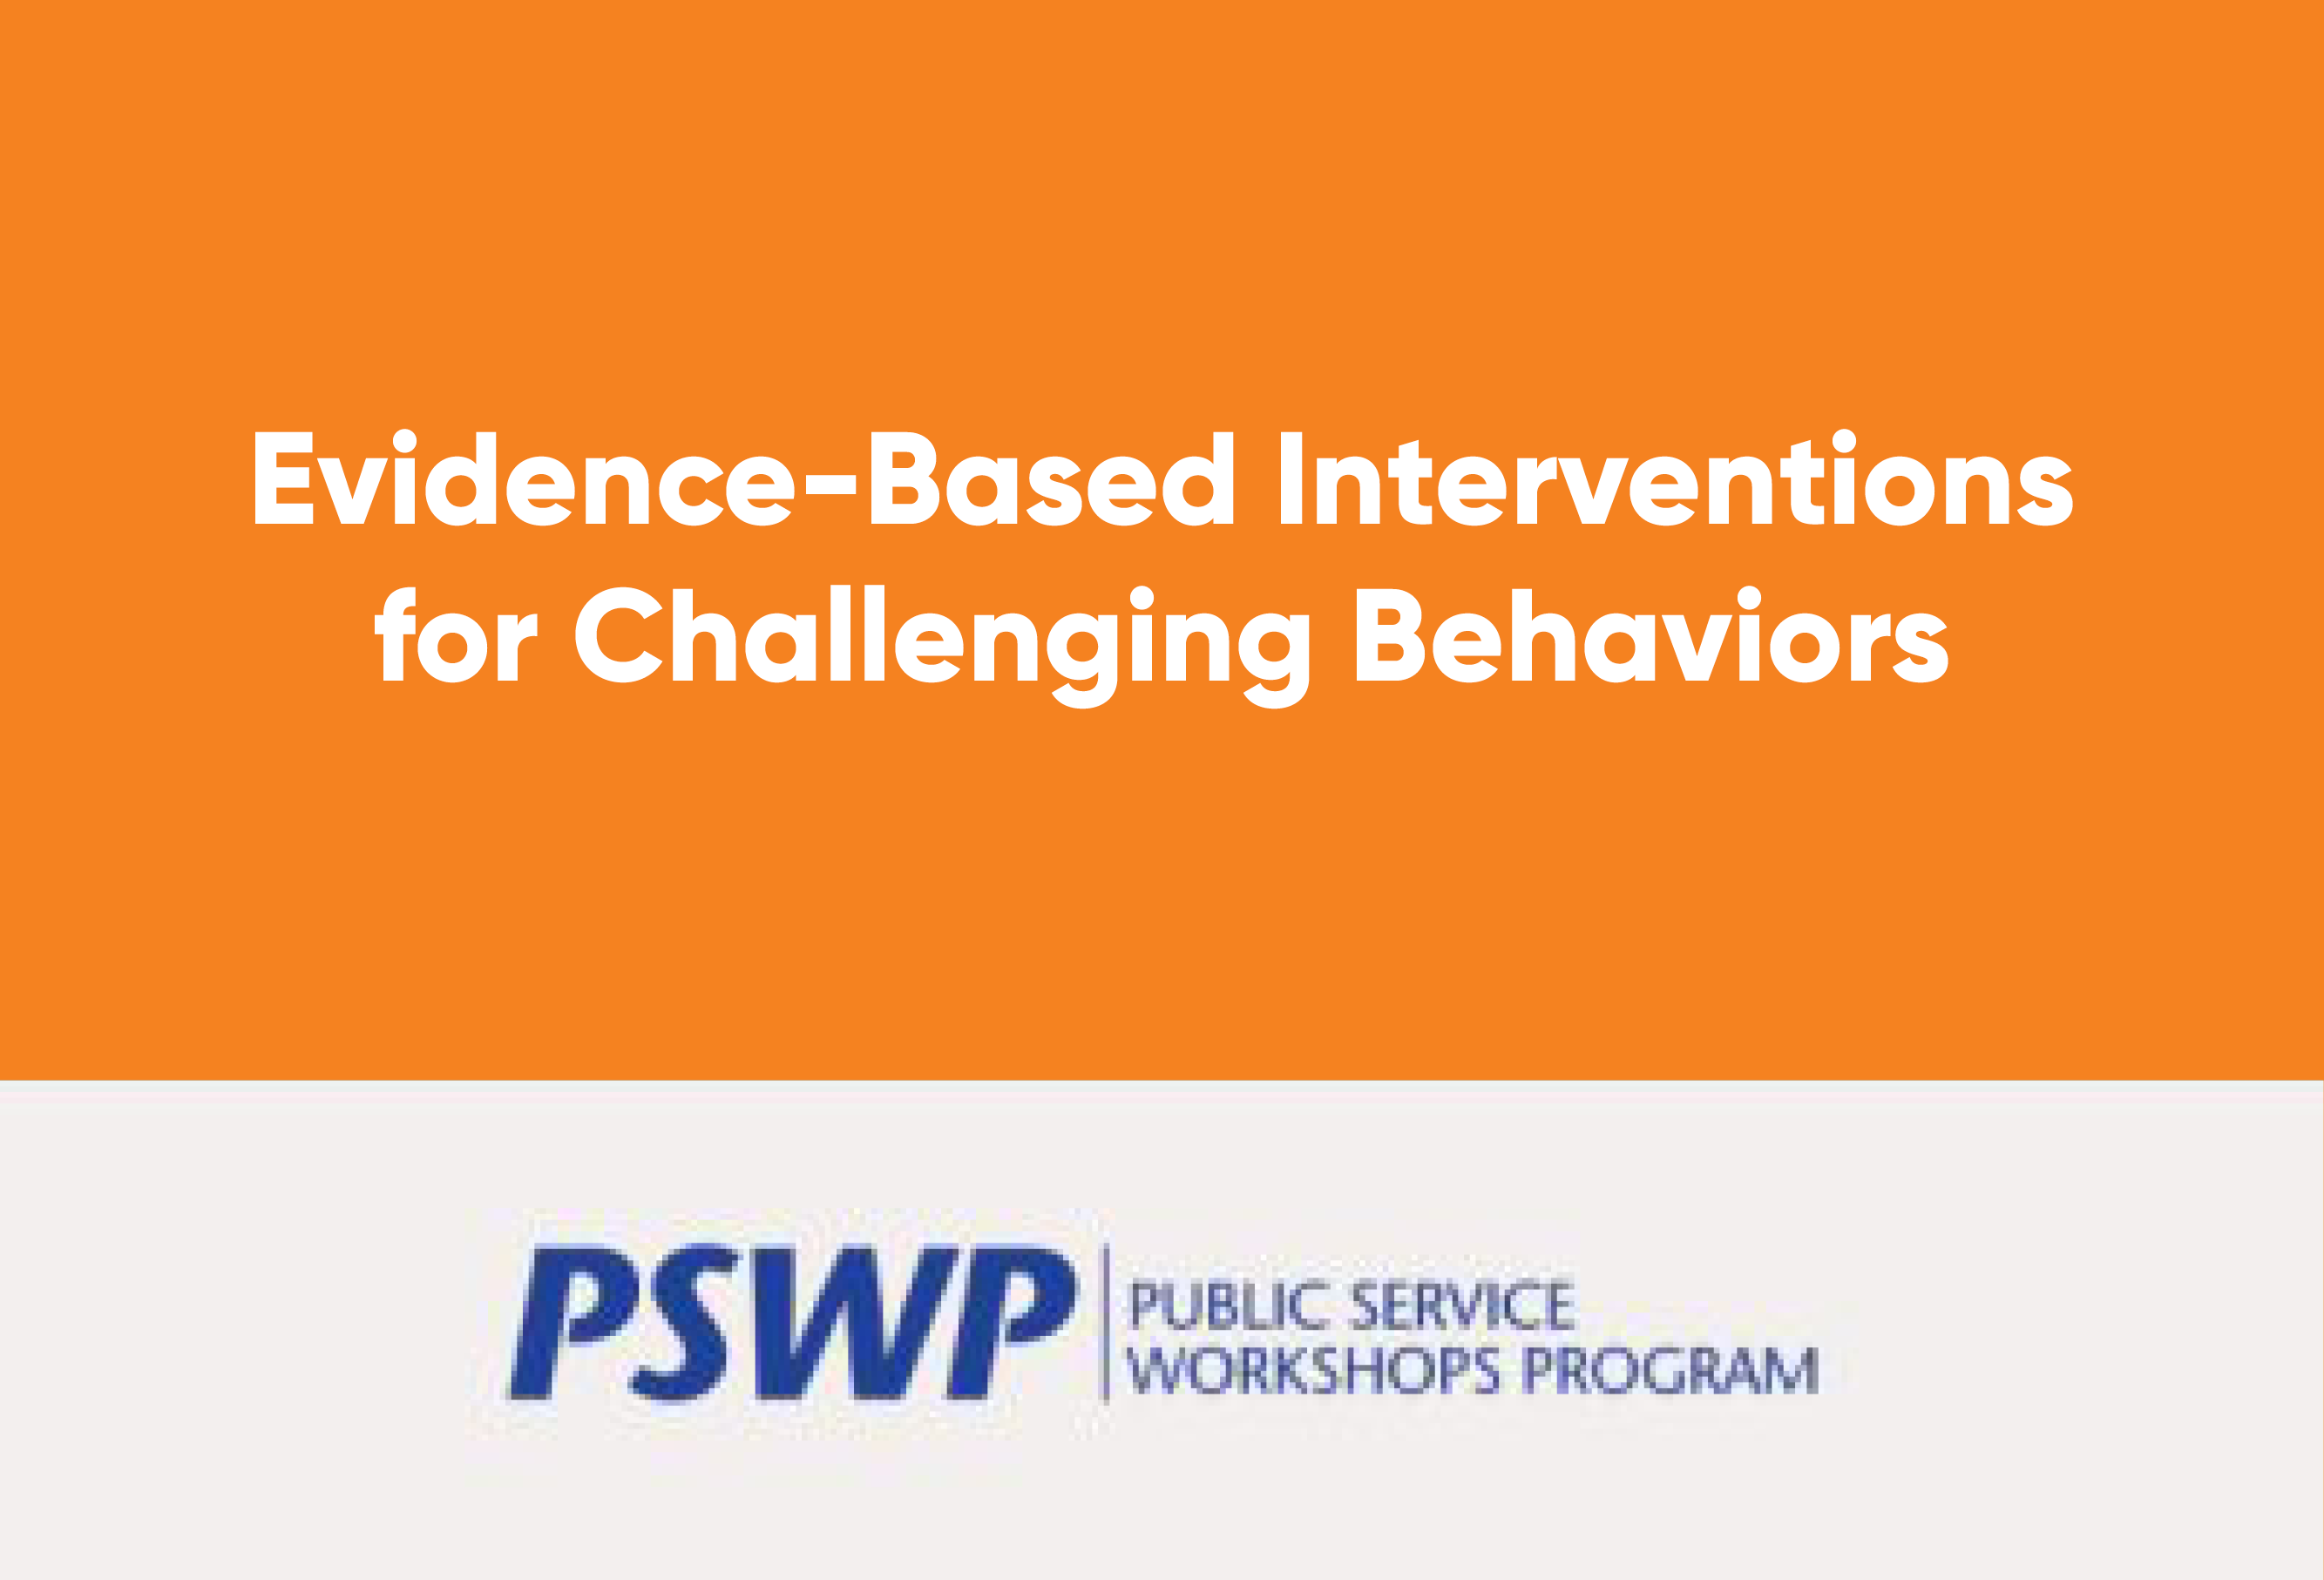 Dec. 2: Evidence-Based Interventions for Challenging Behaviors